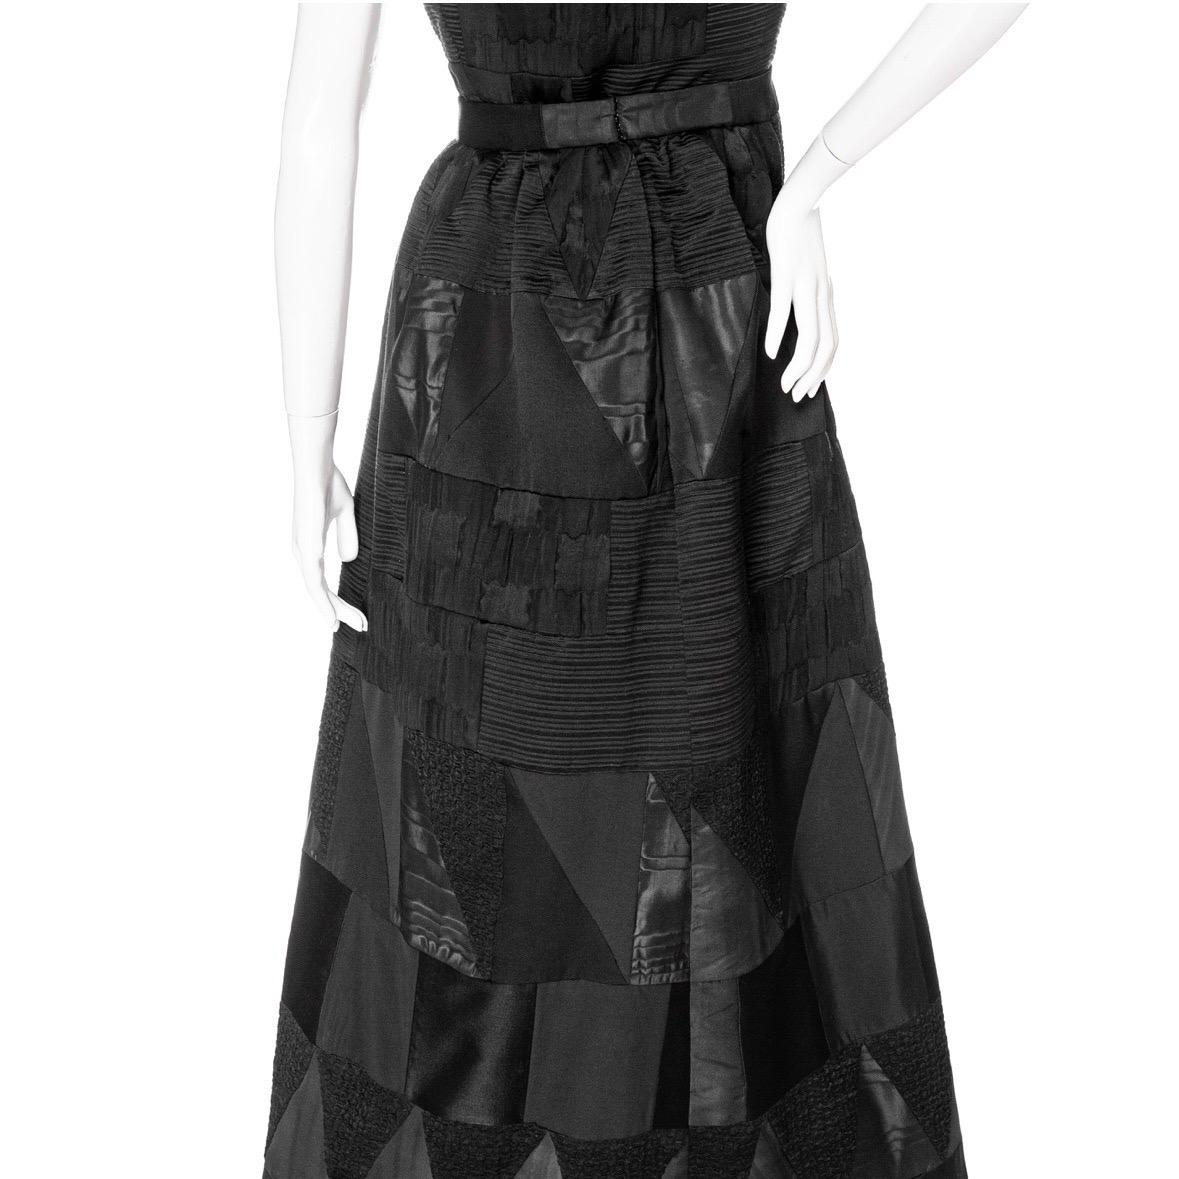 Yves Saint Laurent Vintage Haute Couture Two-Piece Top and Skirt Set (1960s) For Sale 3